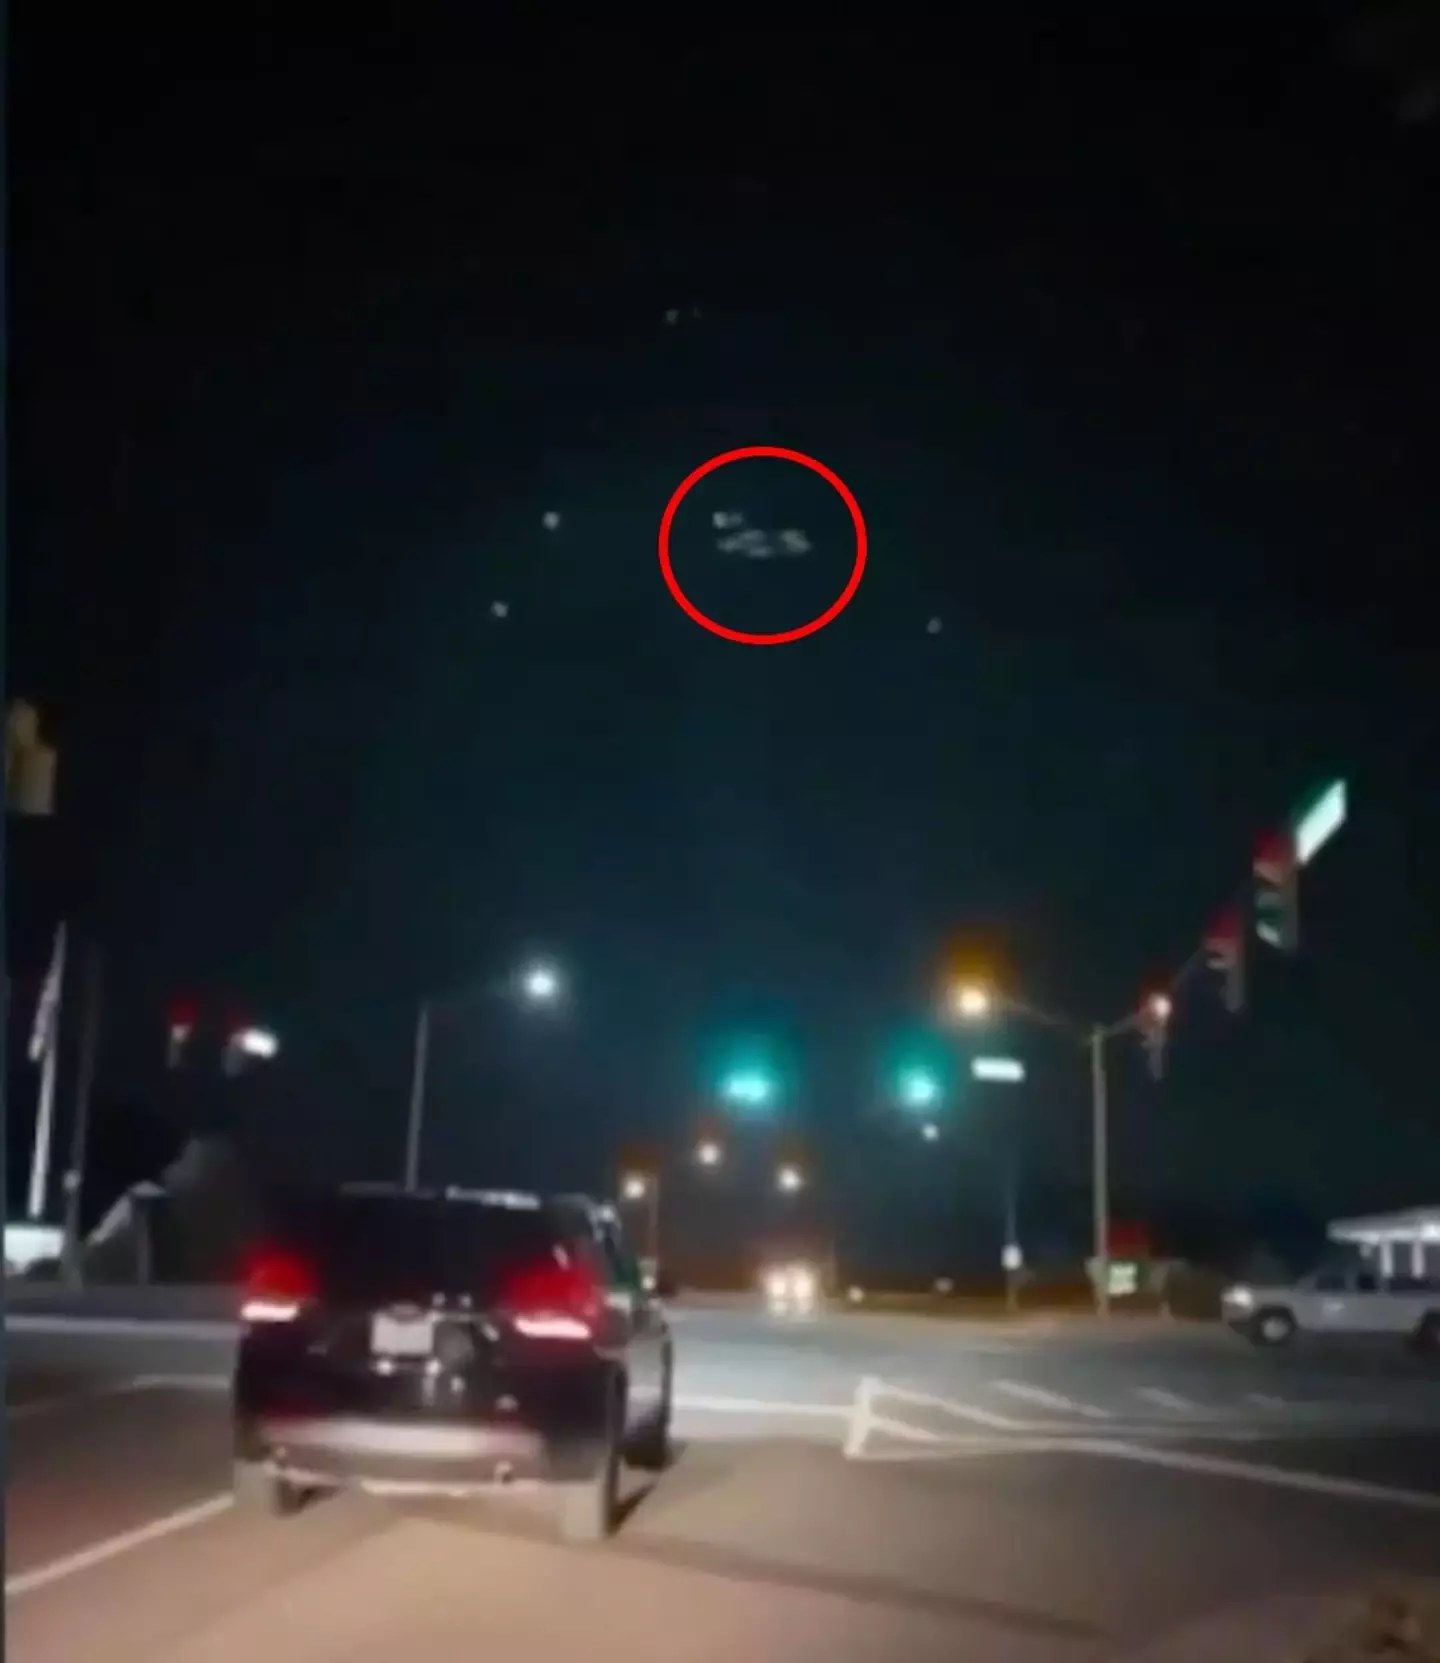 The 'UFO' hovered above the traffic in Ohio.